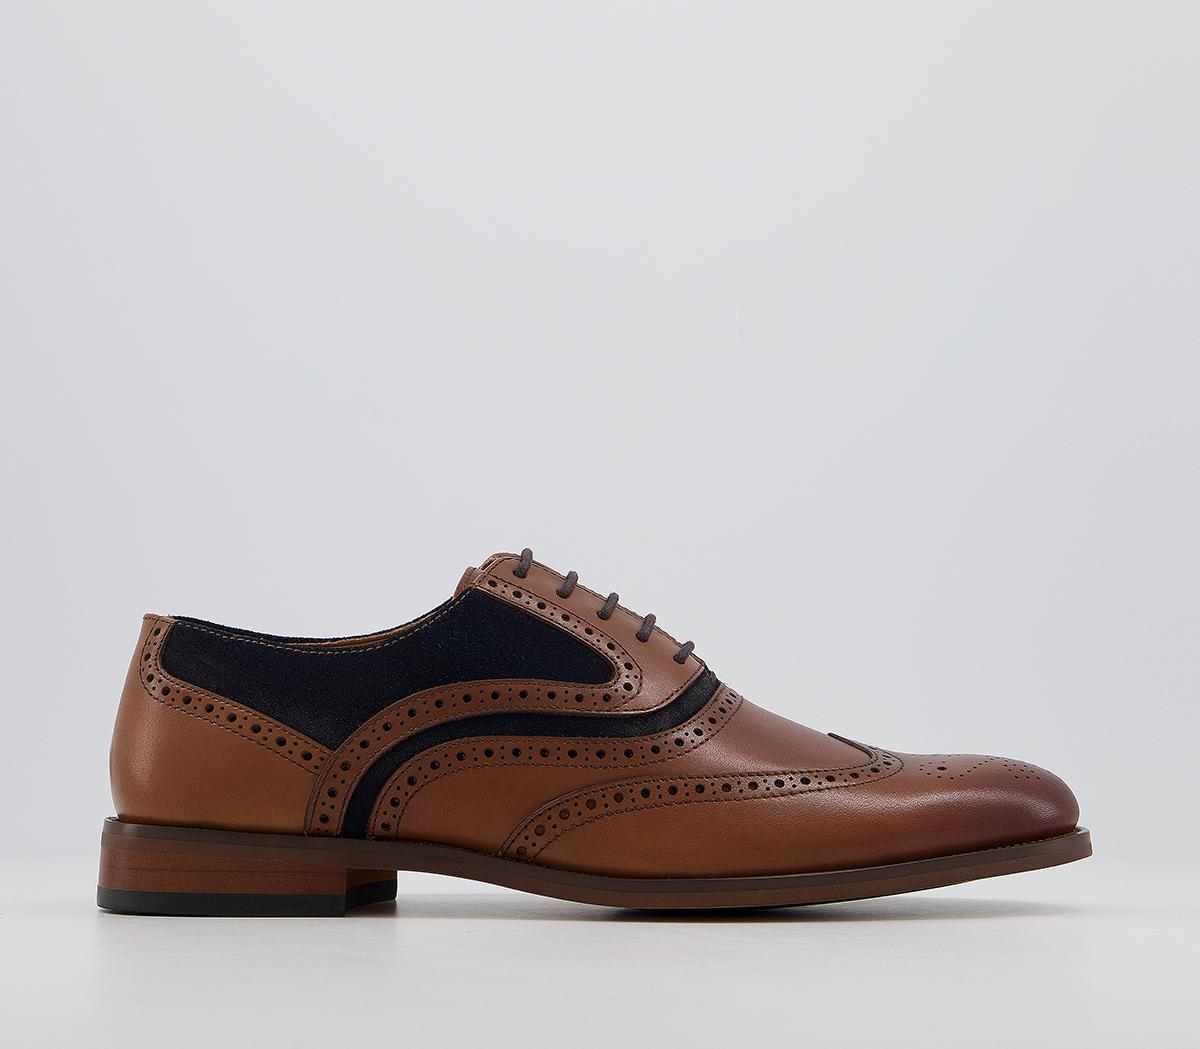 OFFICEInfuse BroguesTan Leather Navy Suede